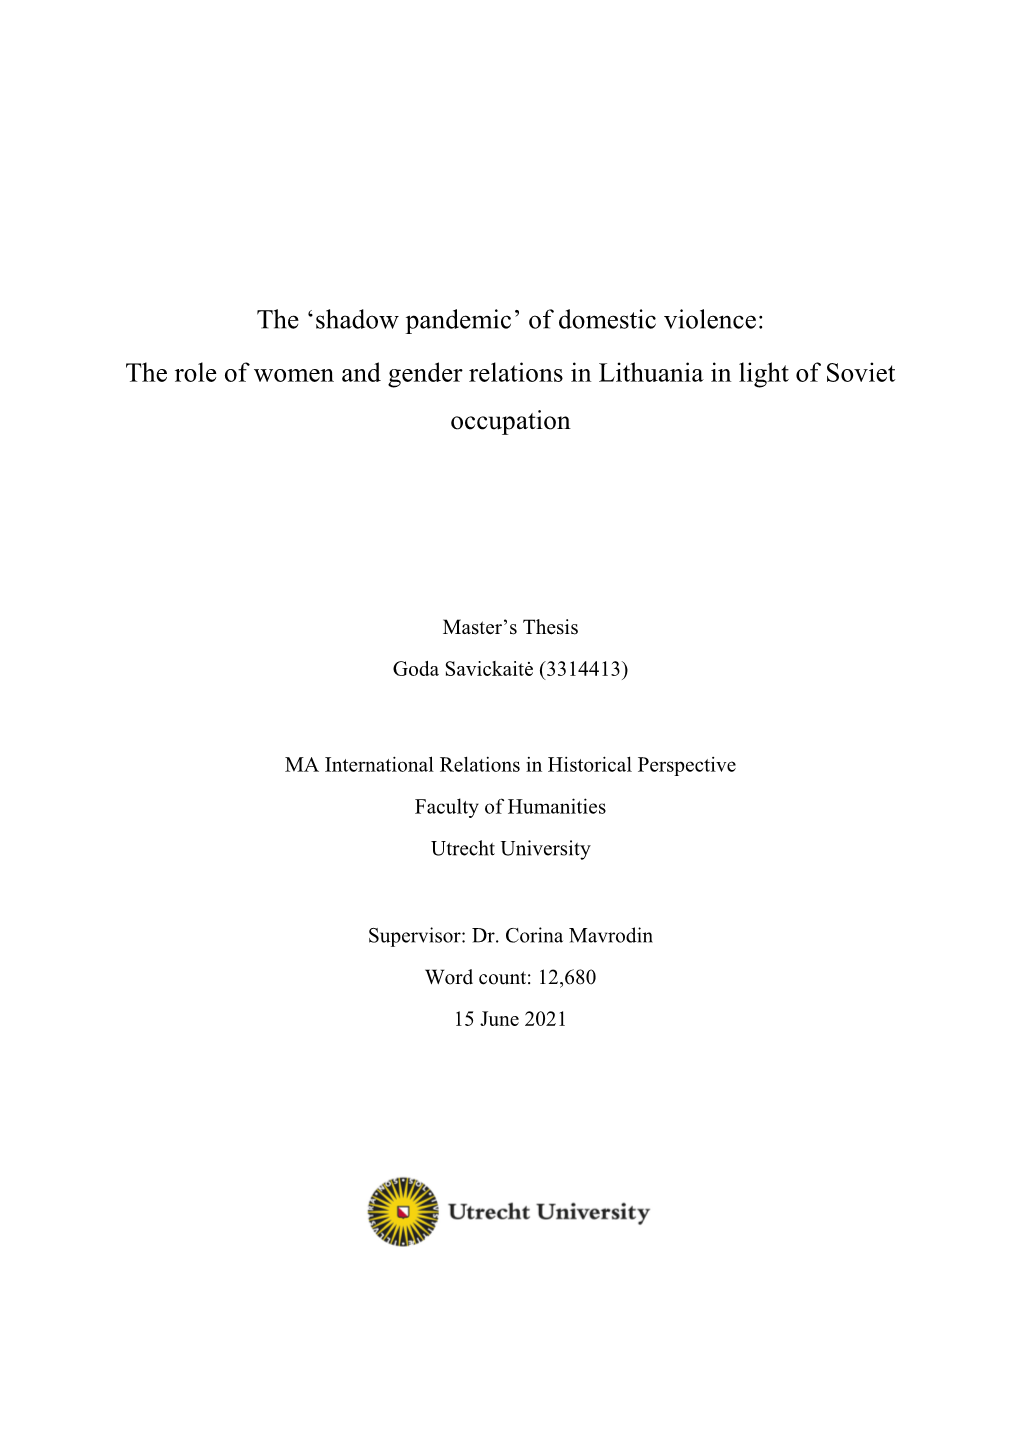 The „Shadow Pandemic‟ of Domestic Violence: the Role of Women and Gender Relations in Lithuania in Light of Soviet Occupation